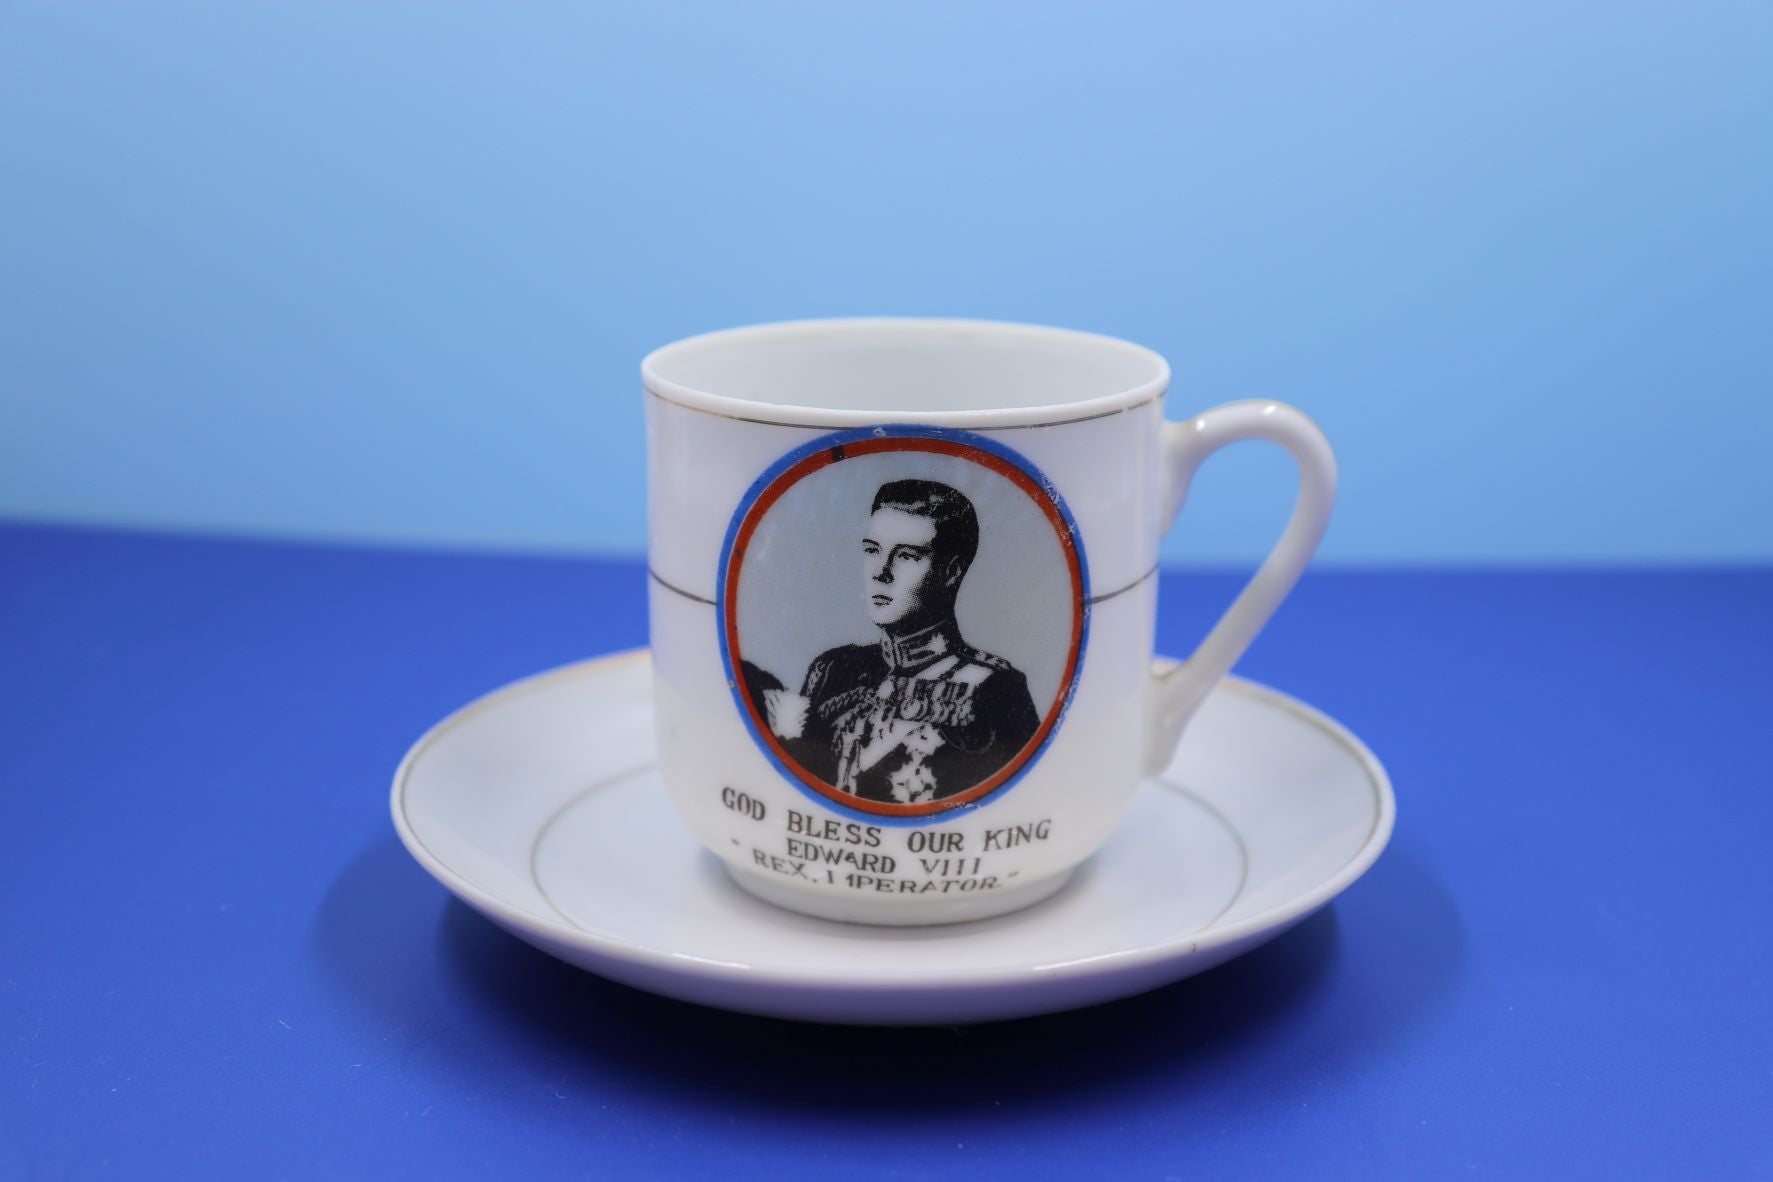 Small Demitasse Size Cup And Saucer - King Edward VIII